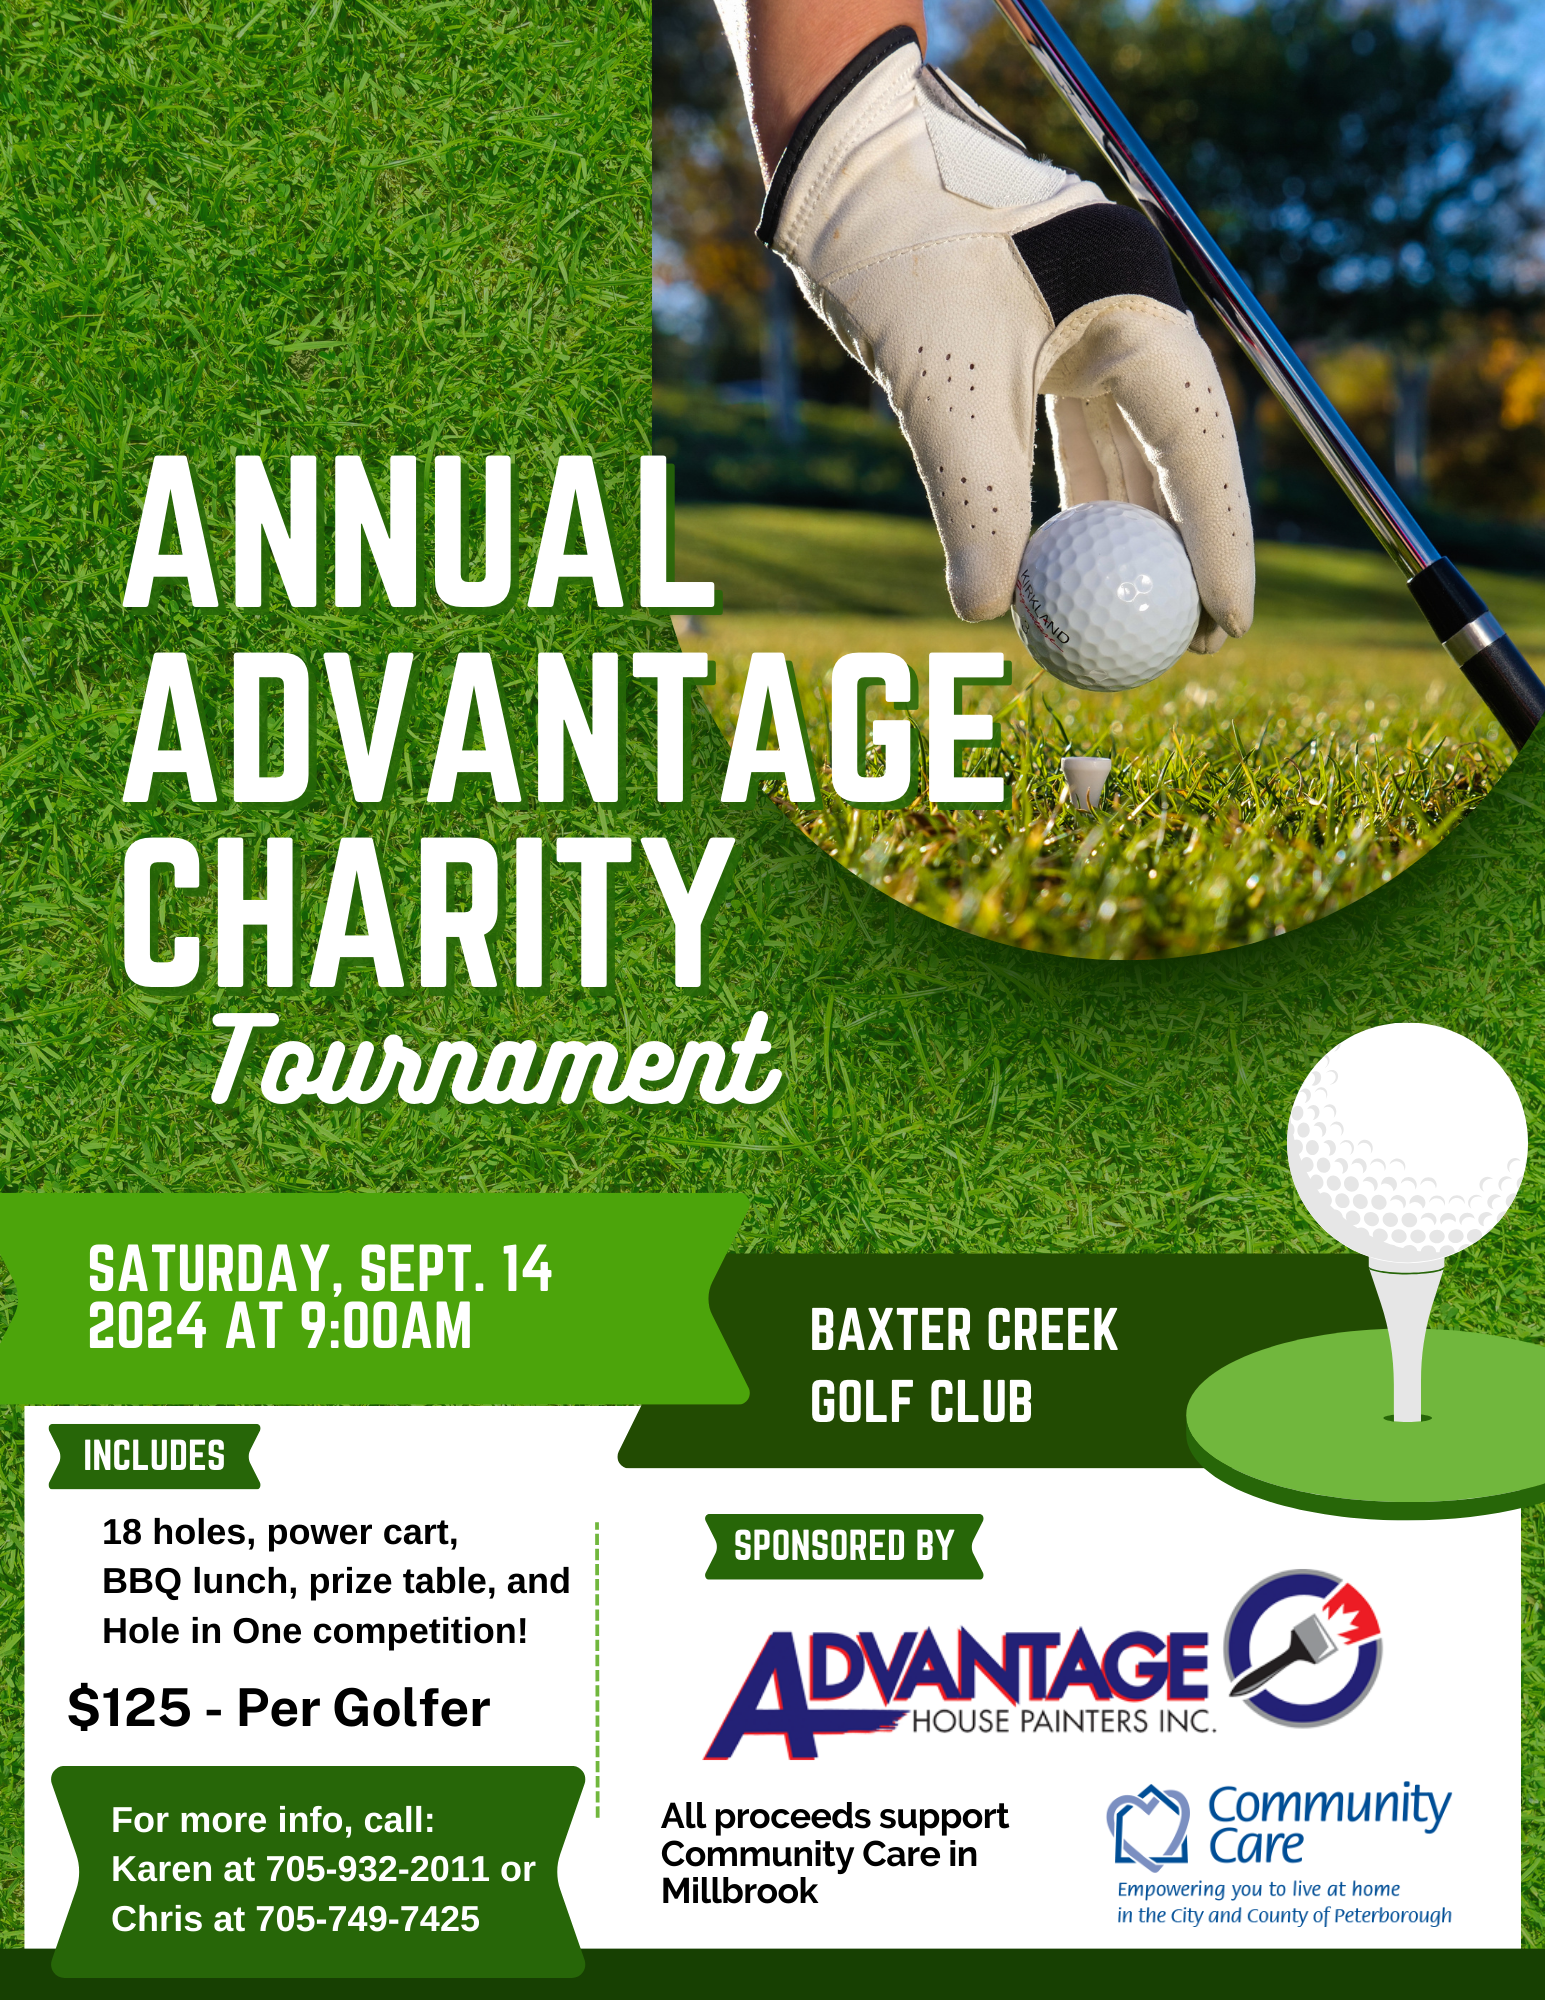 Graphic for Golf Tournament fundraiser for Millbrook office